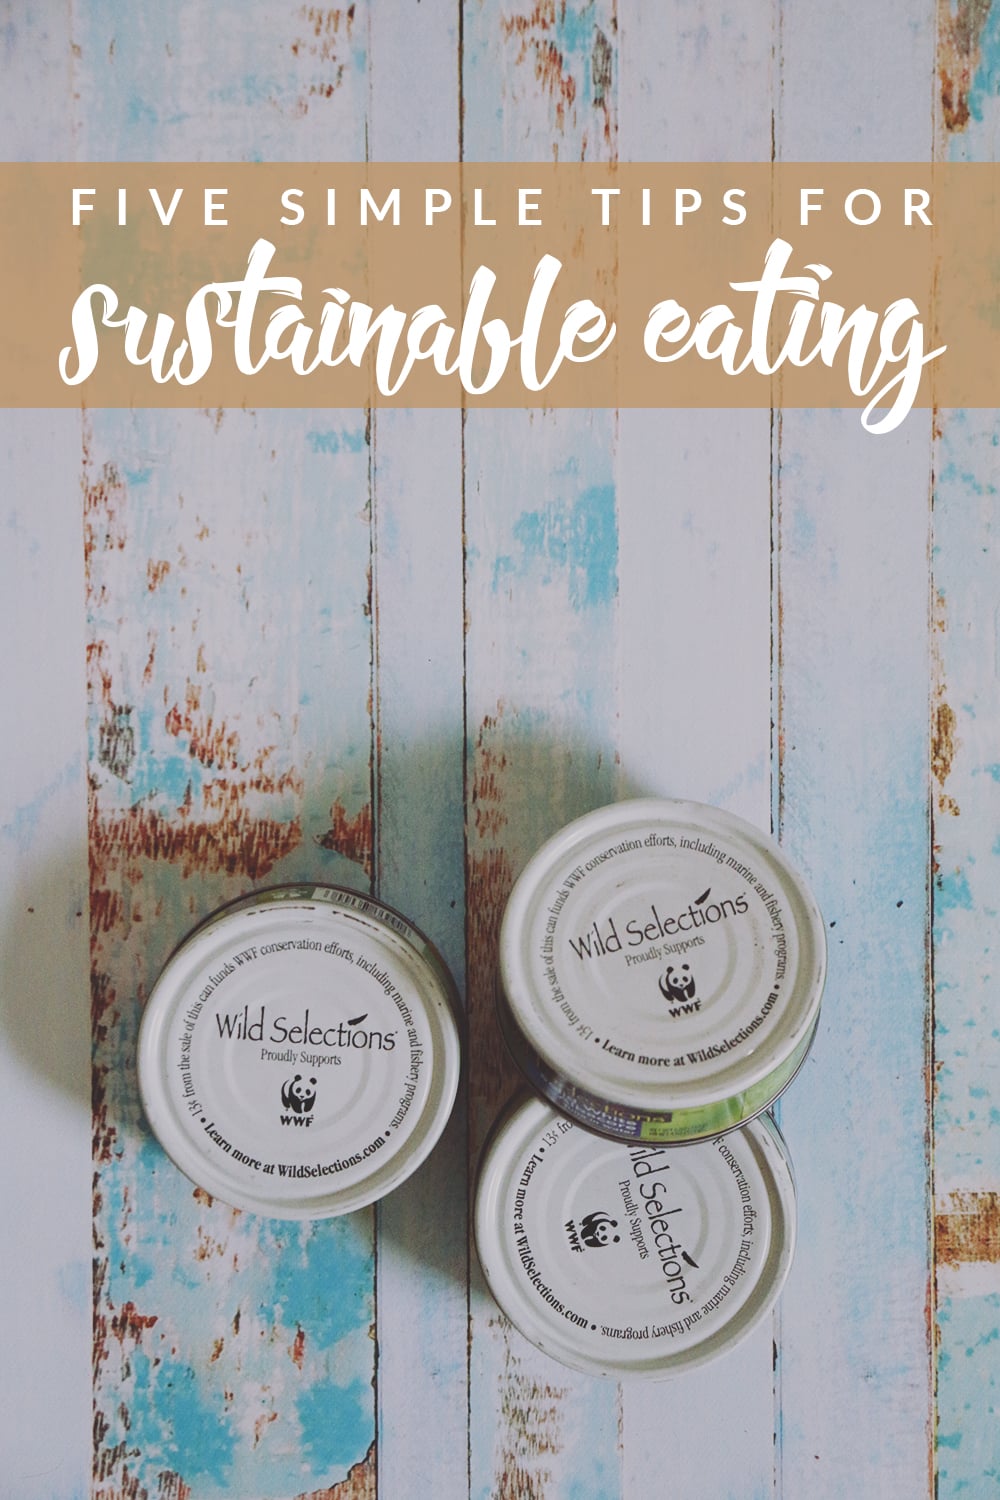 Living a more eco-friendly life doesn't have to be hard, especially with these five simple tips for sustainable eating. You'll be eating greener in no time!